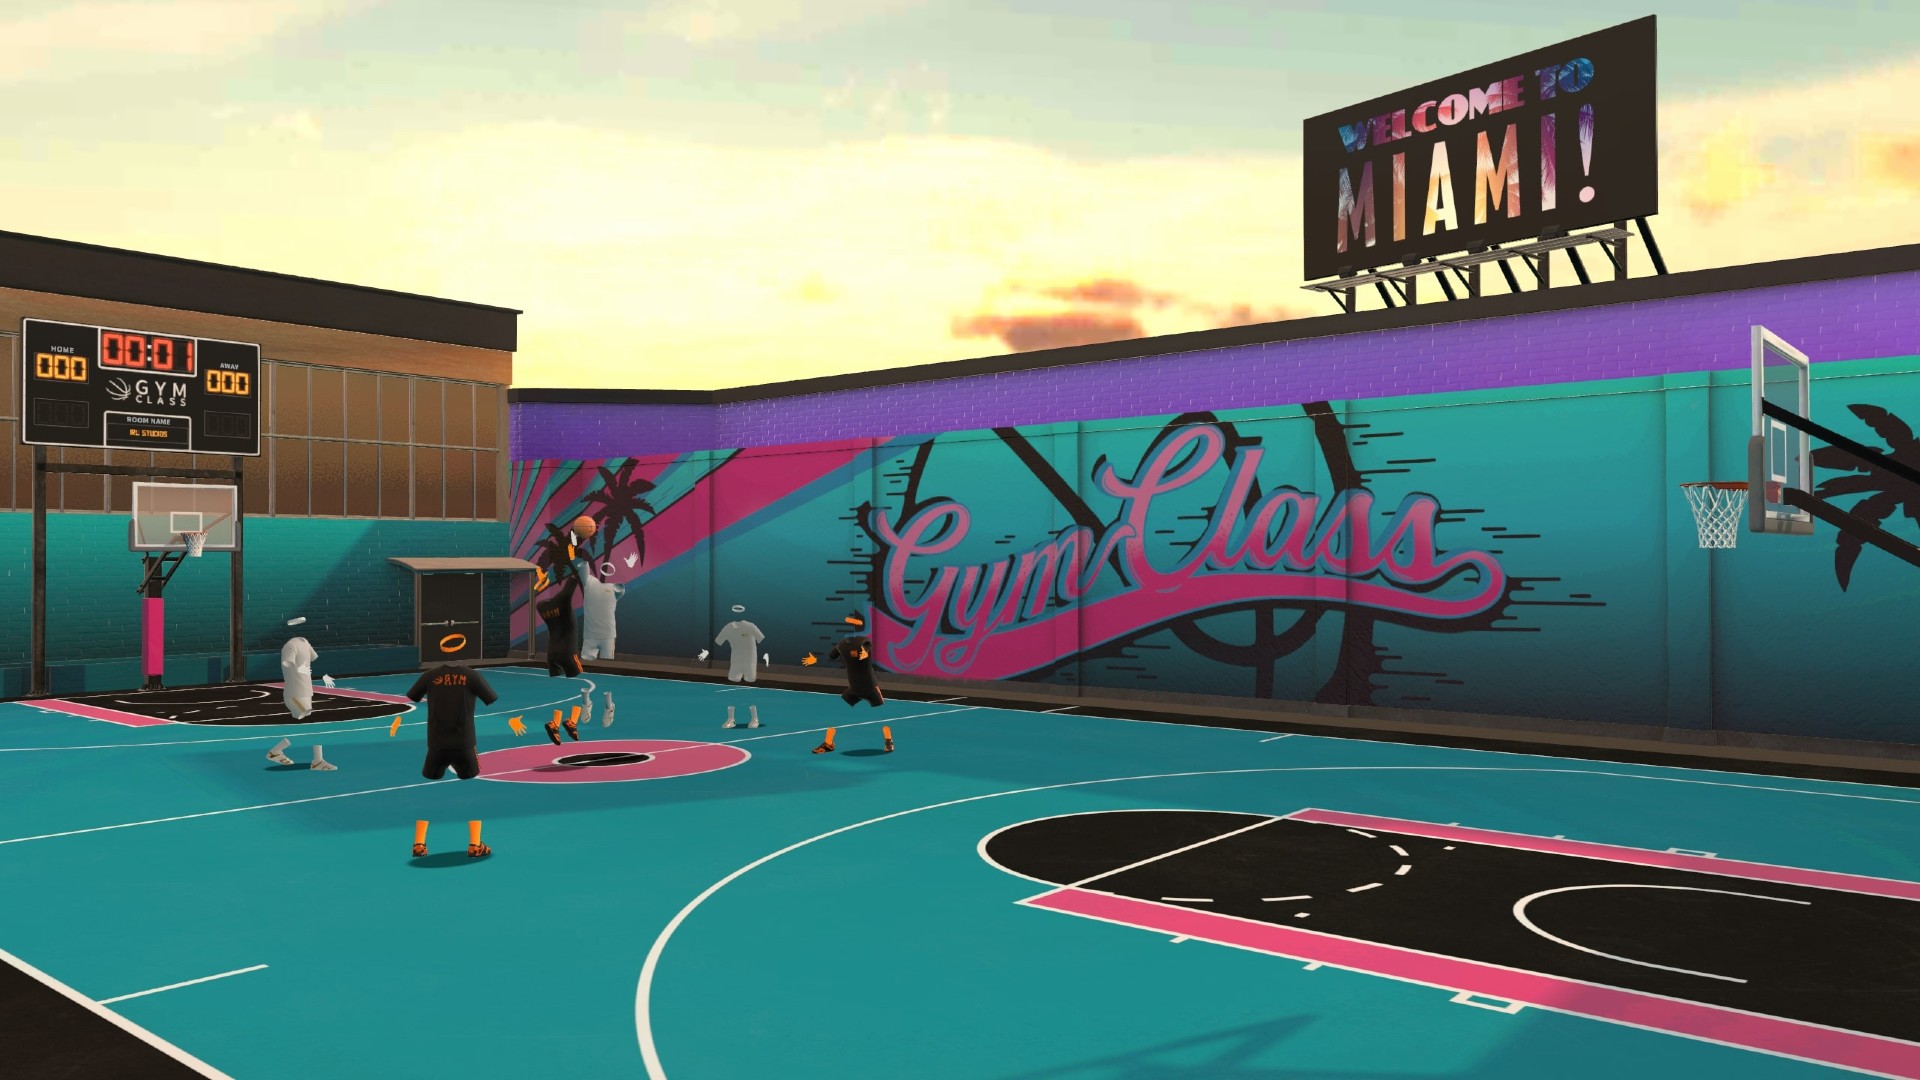 Image of the Miami basketball court used in the VR Class Gym for Meta Quest 2